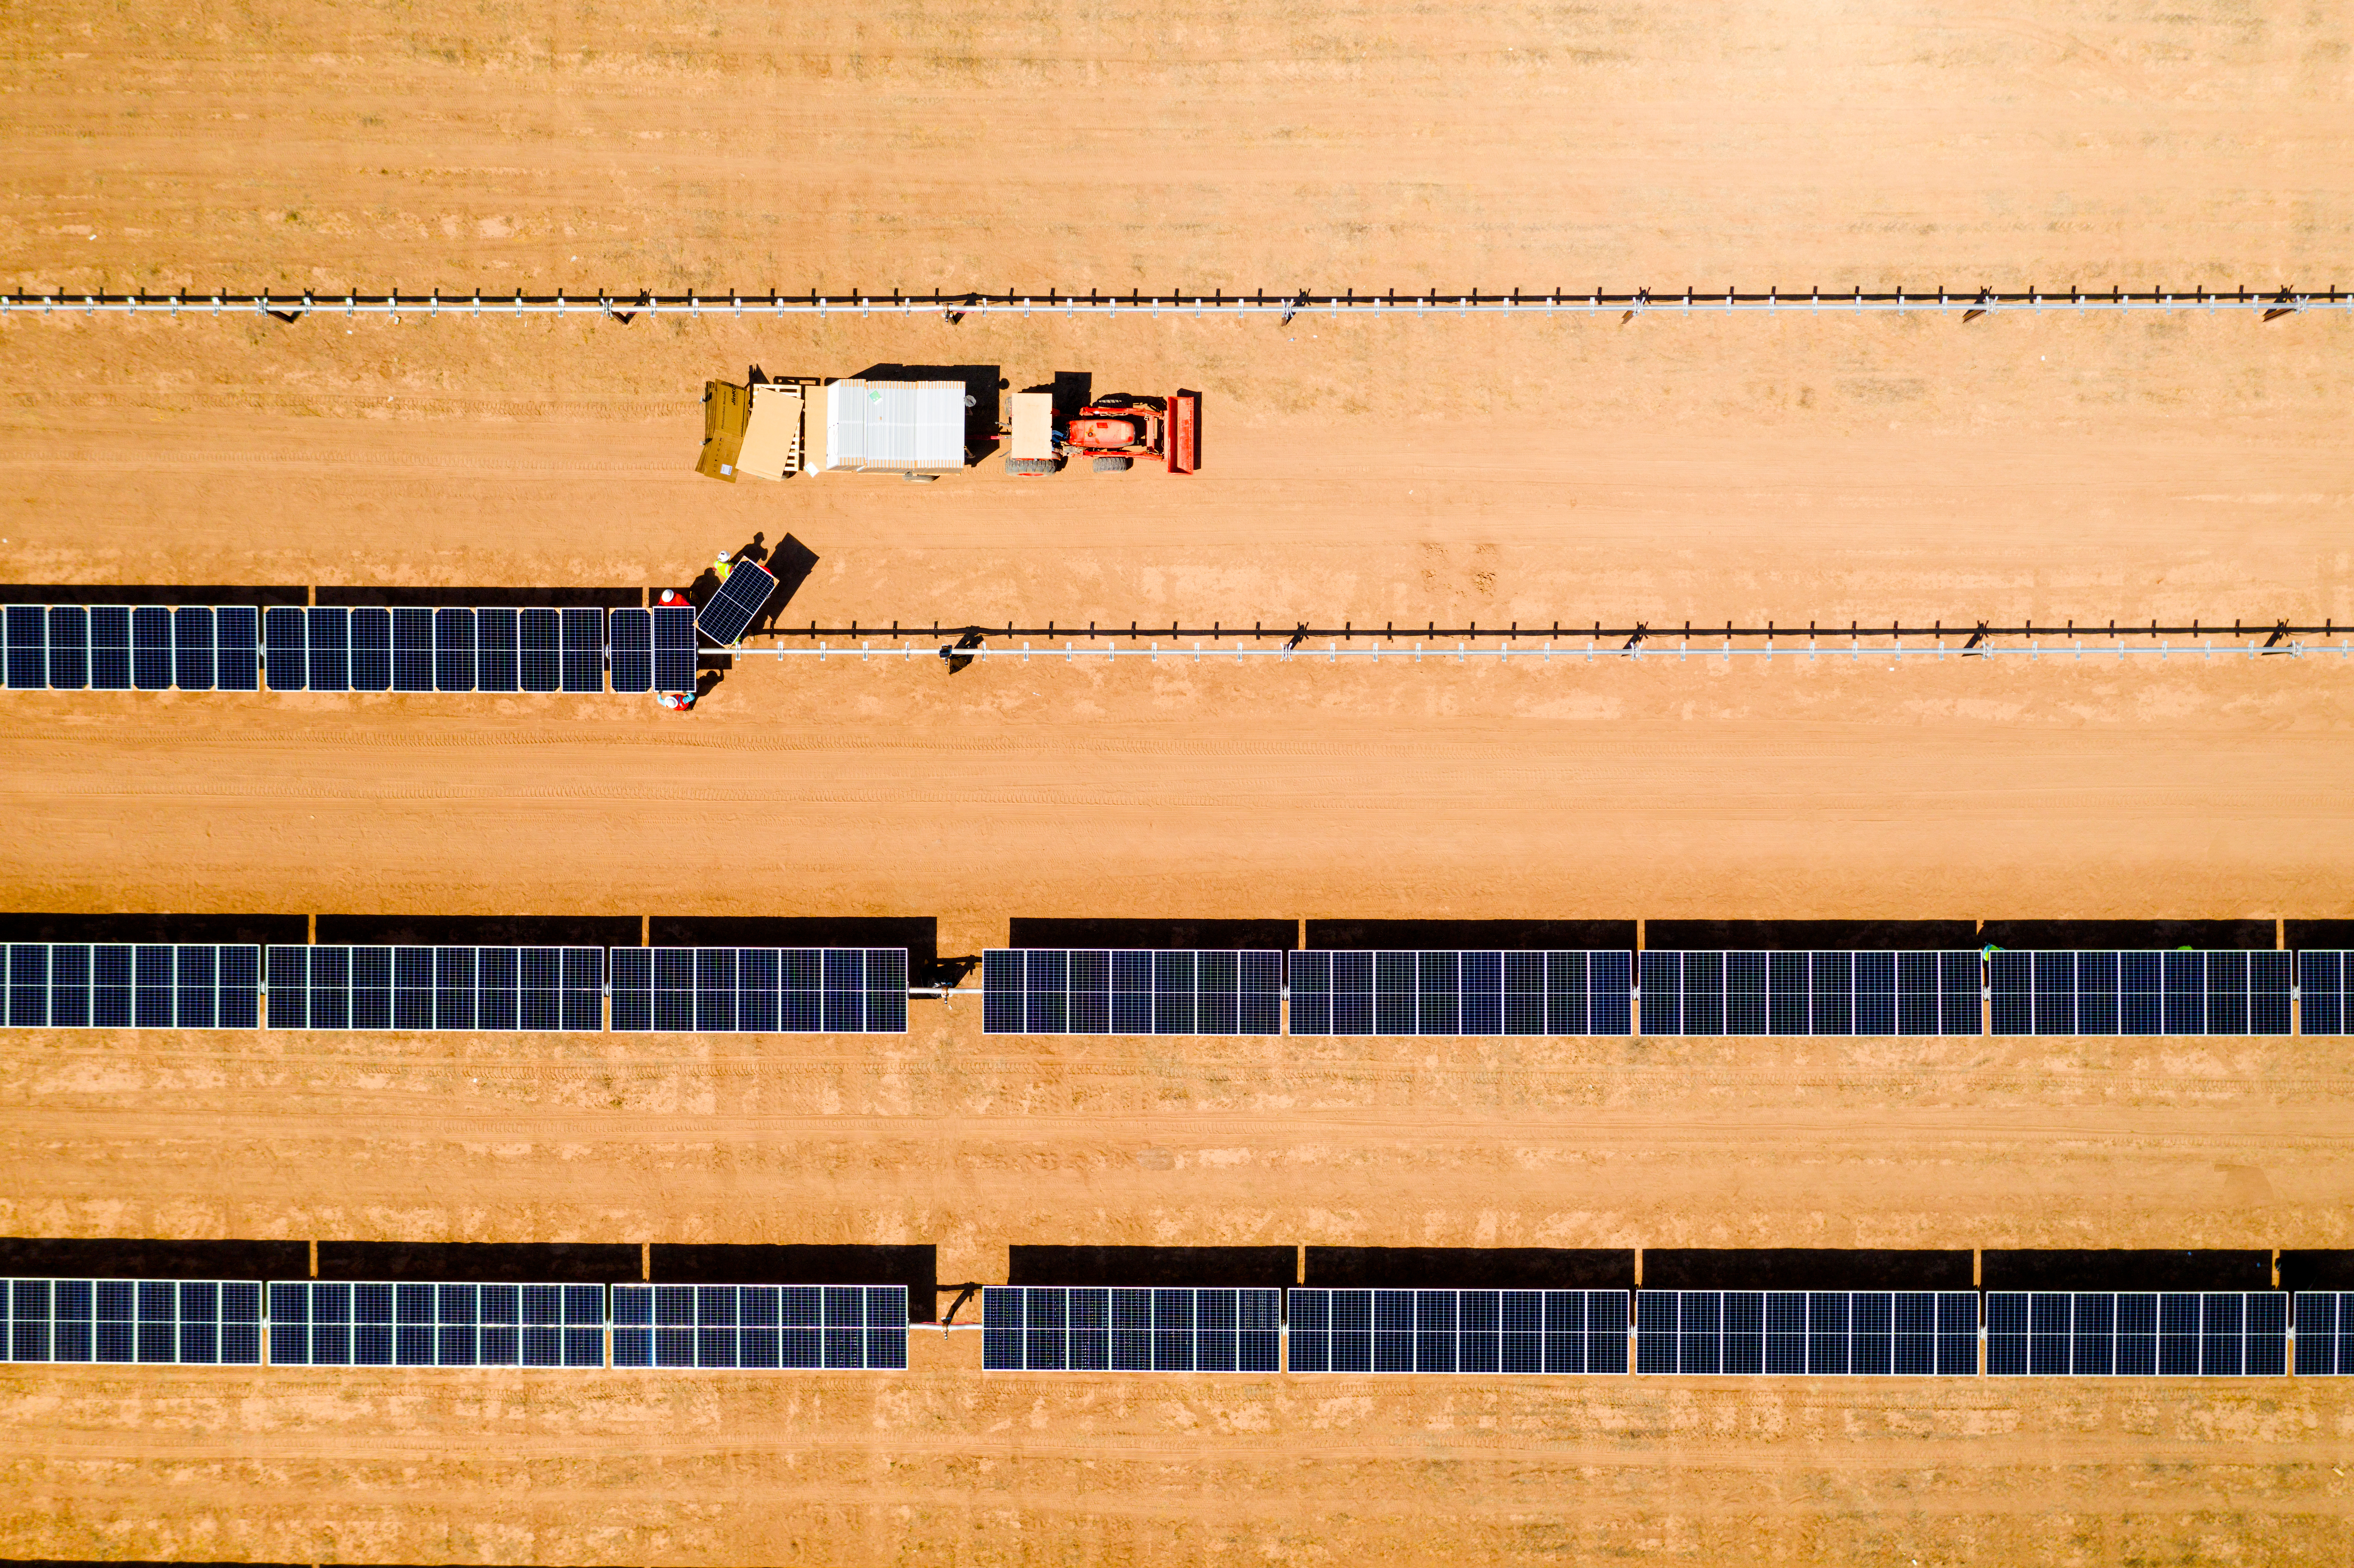 An aerial view of four people and a tractor deploying solar panels.